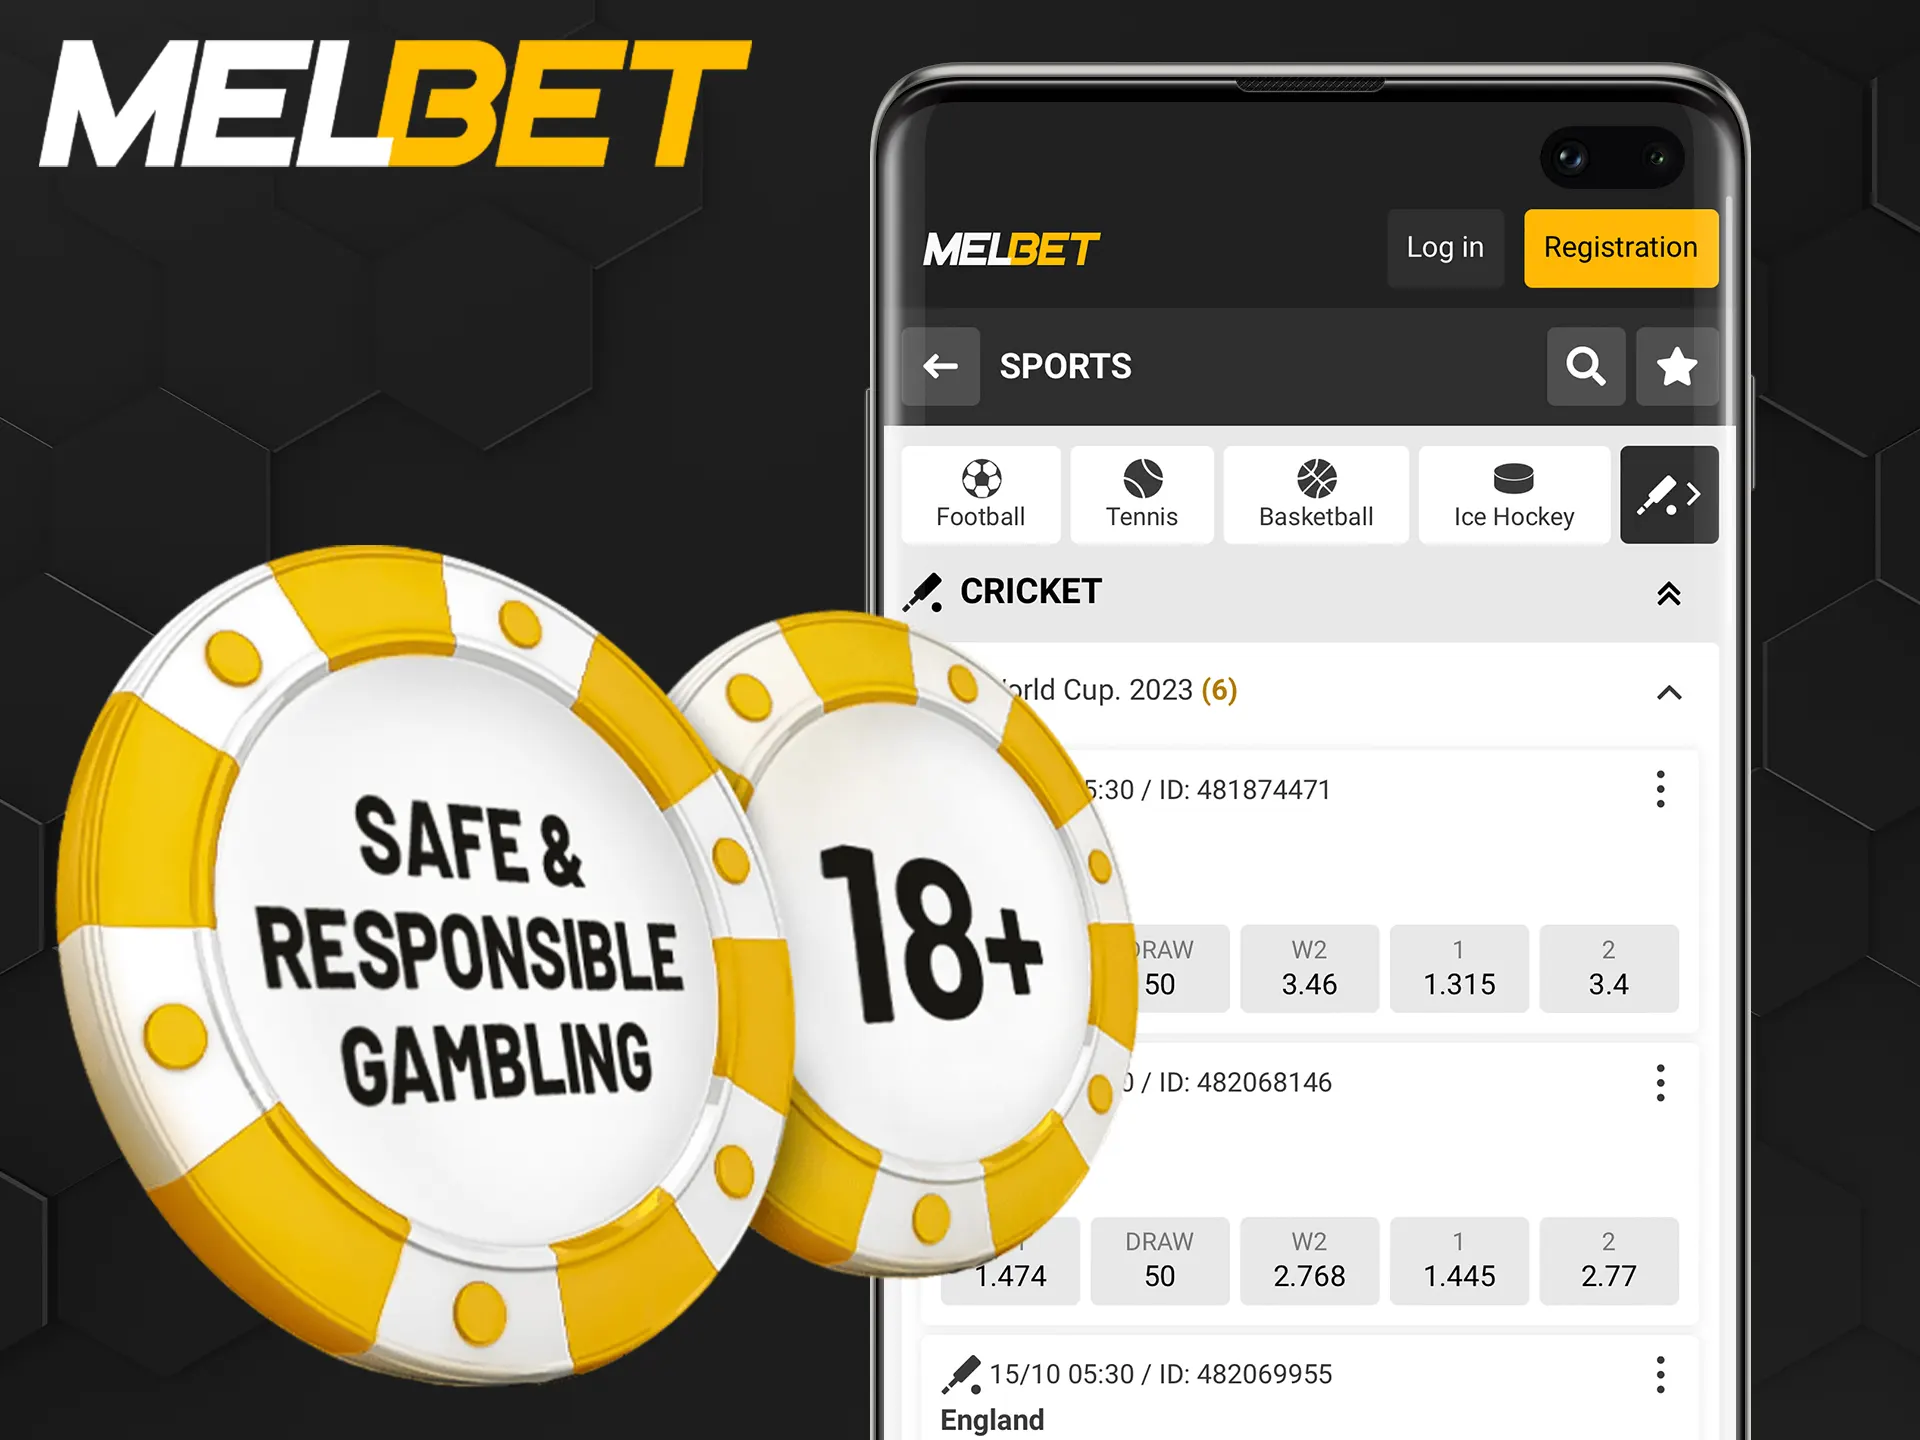 Go through gambling addiction prevention every six months and gamble responsibly.